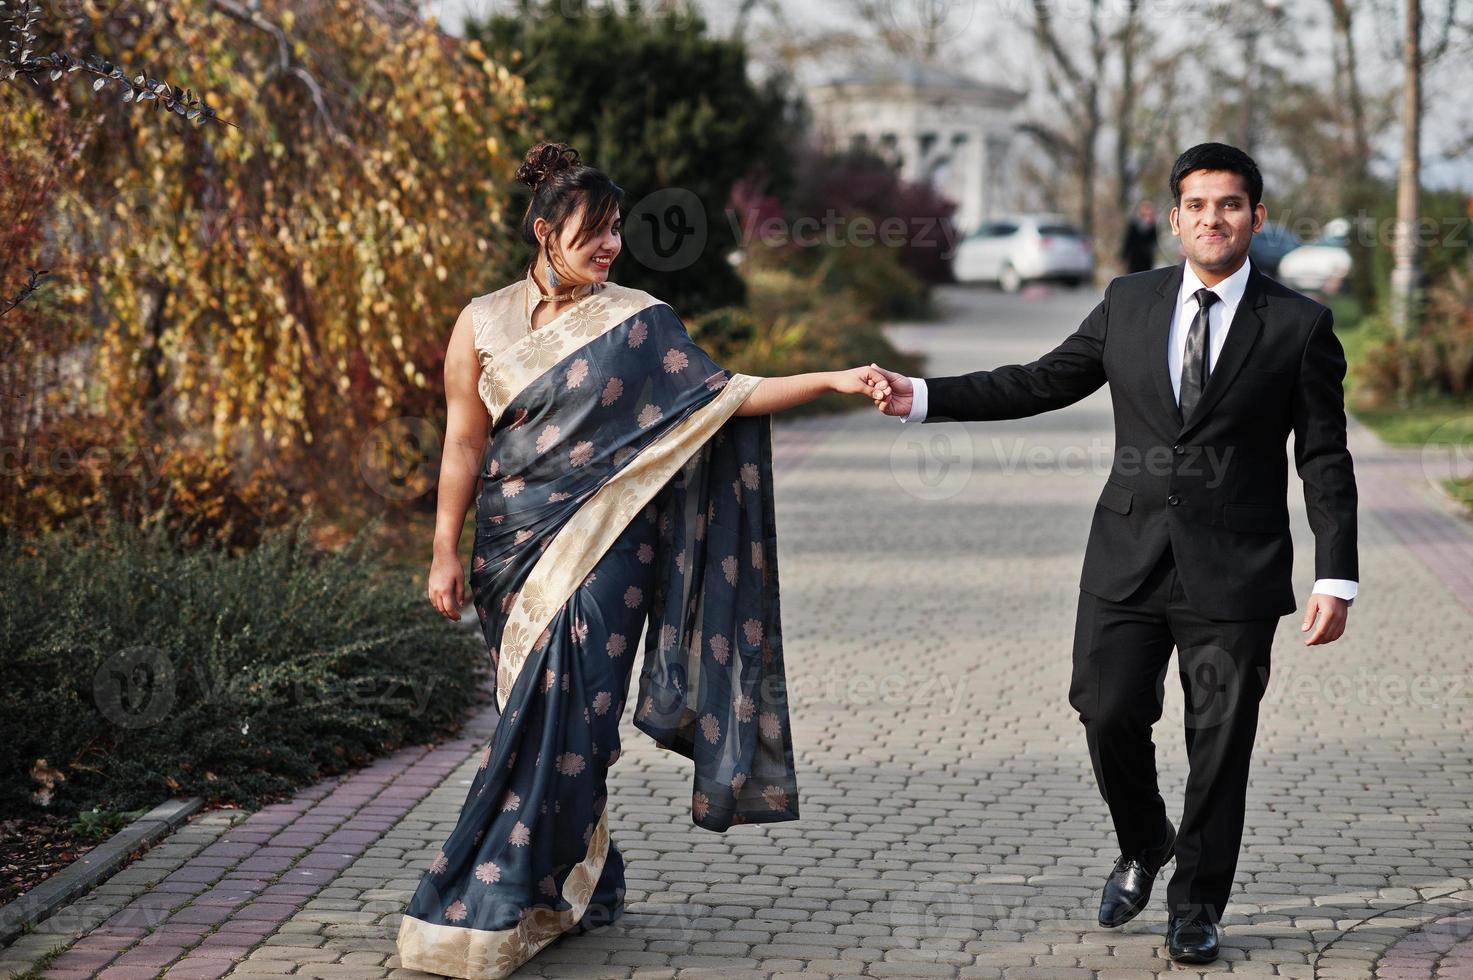 Elegant and fashionable indian friends couple of woman in saree and man in suit walking outdoor and holding hands. photo